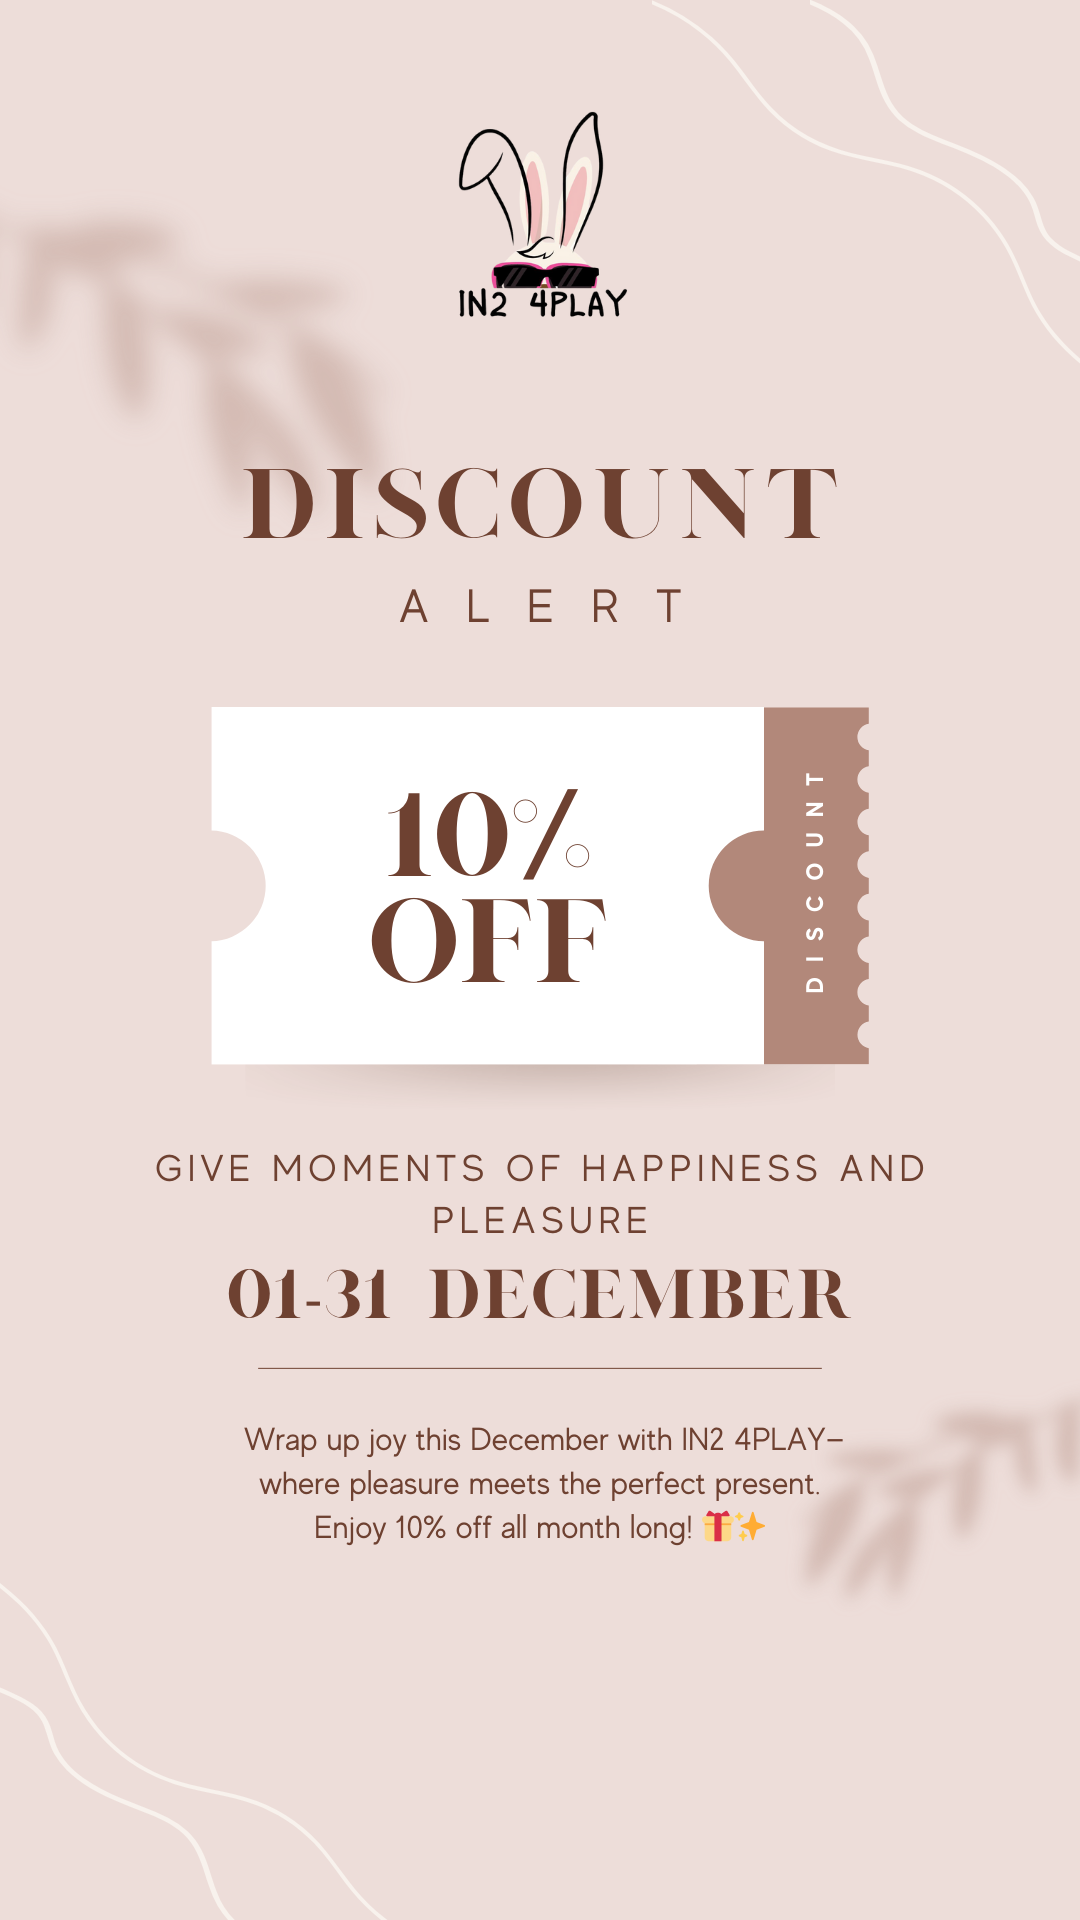 Unwrap Joy: IN2 4PLAY December Delights with a 10% Discount!